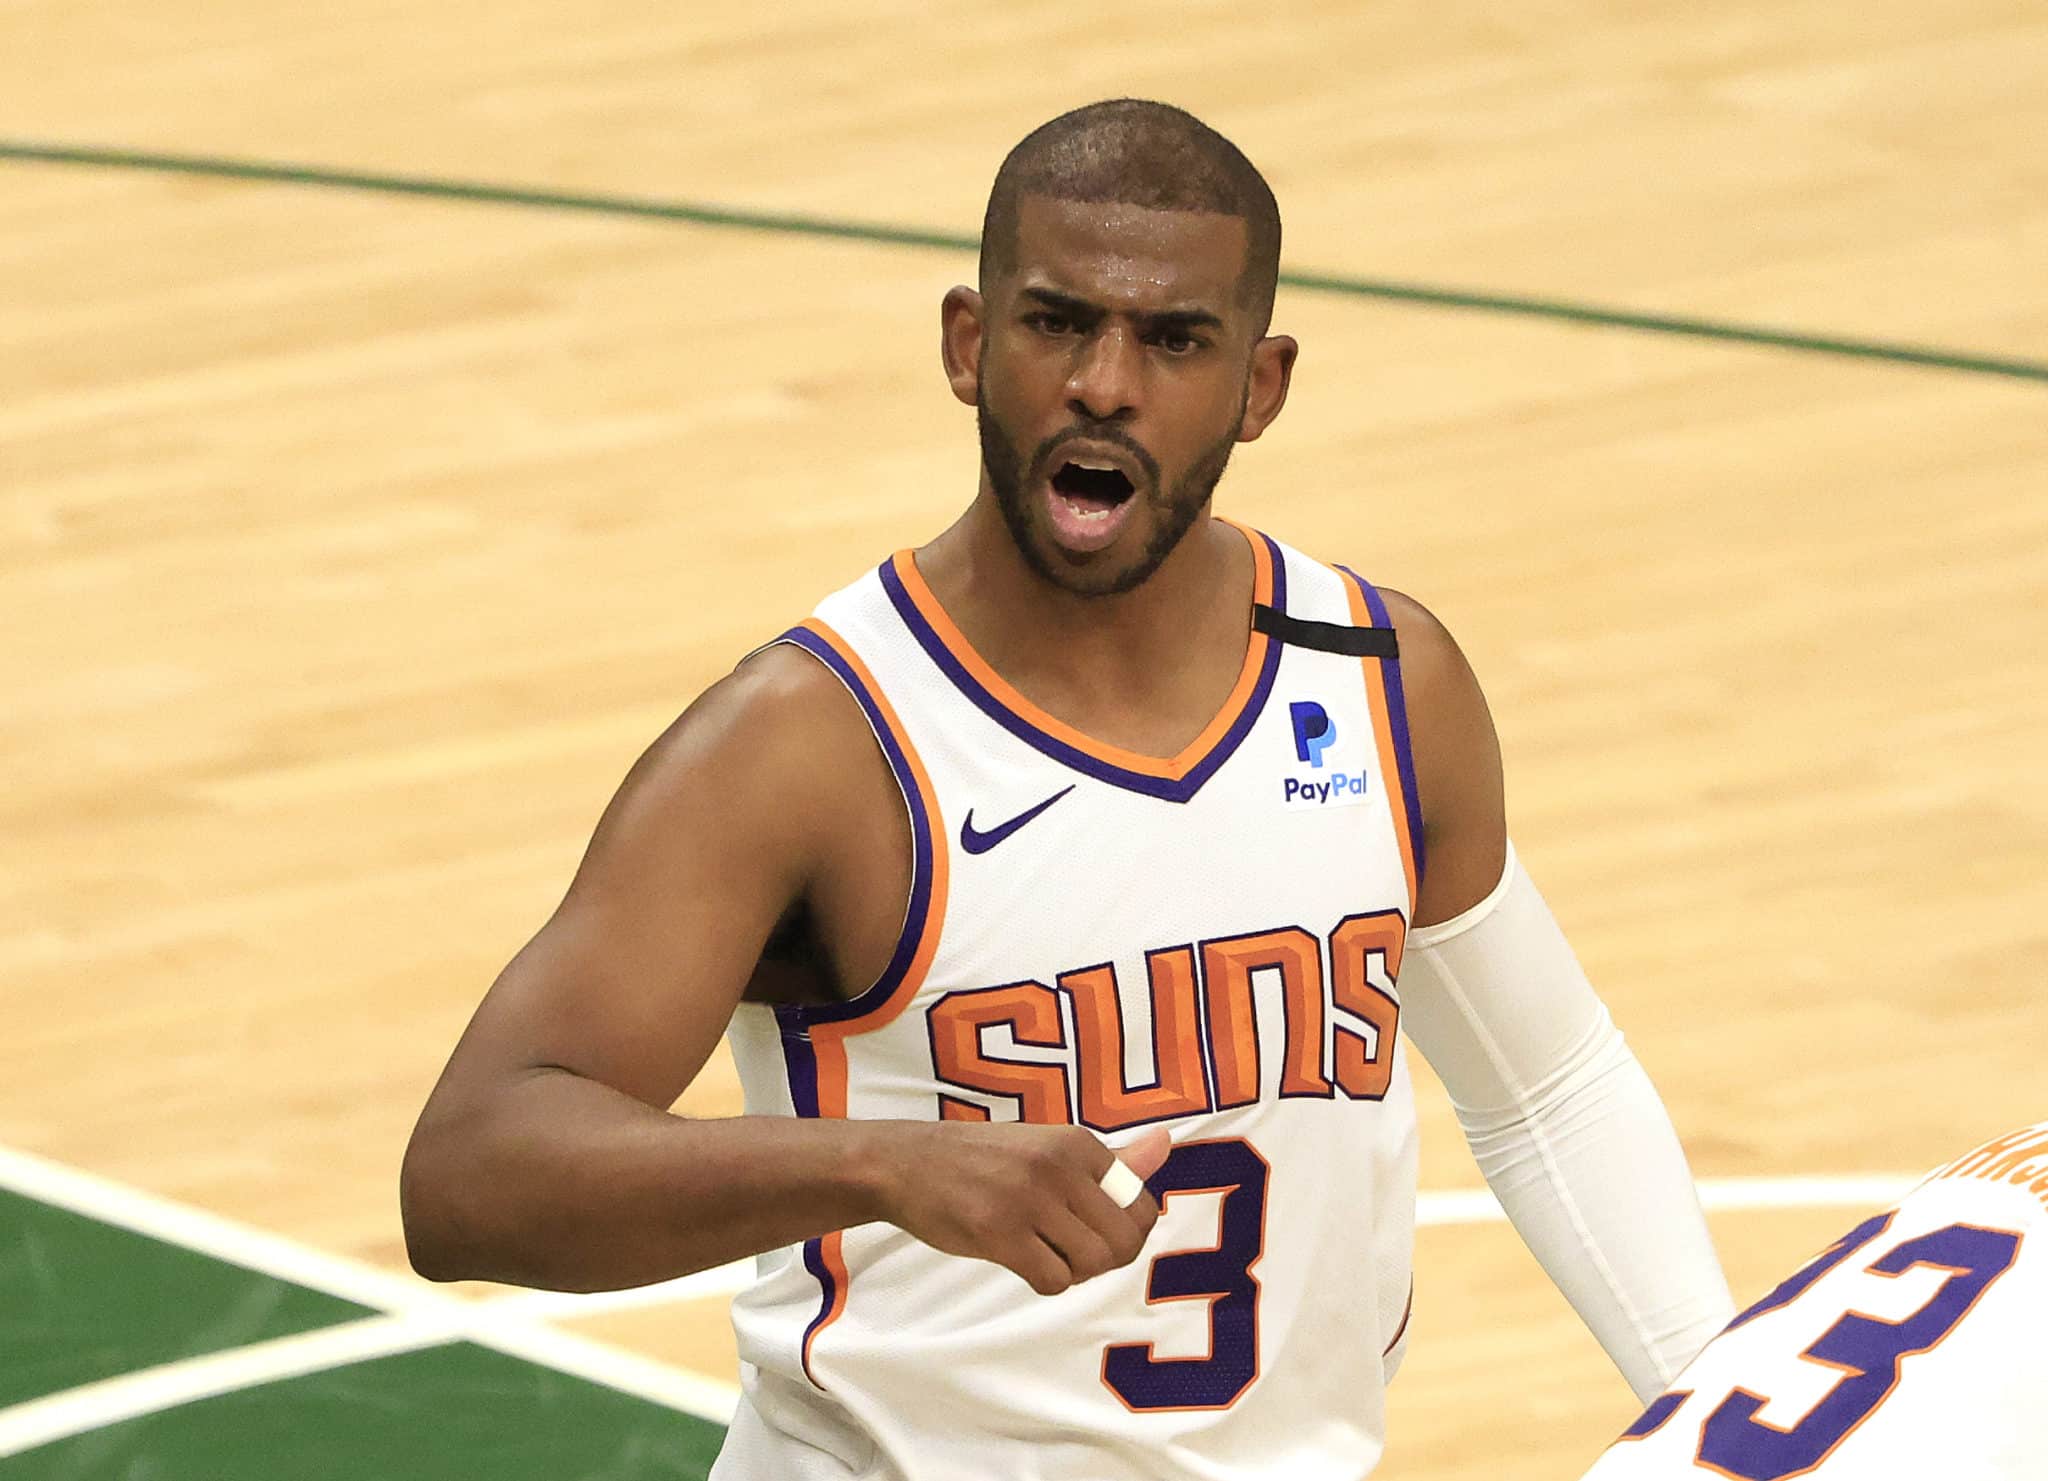 The Phoenix Suns having big issues now with the new CP3 injury!